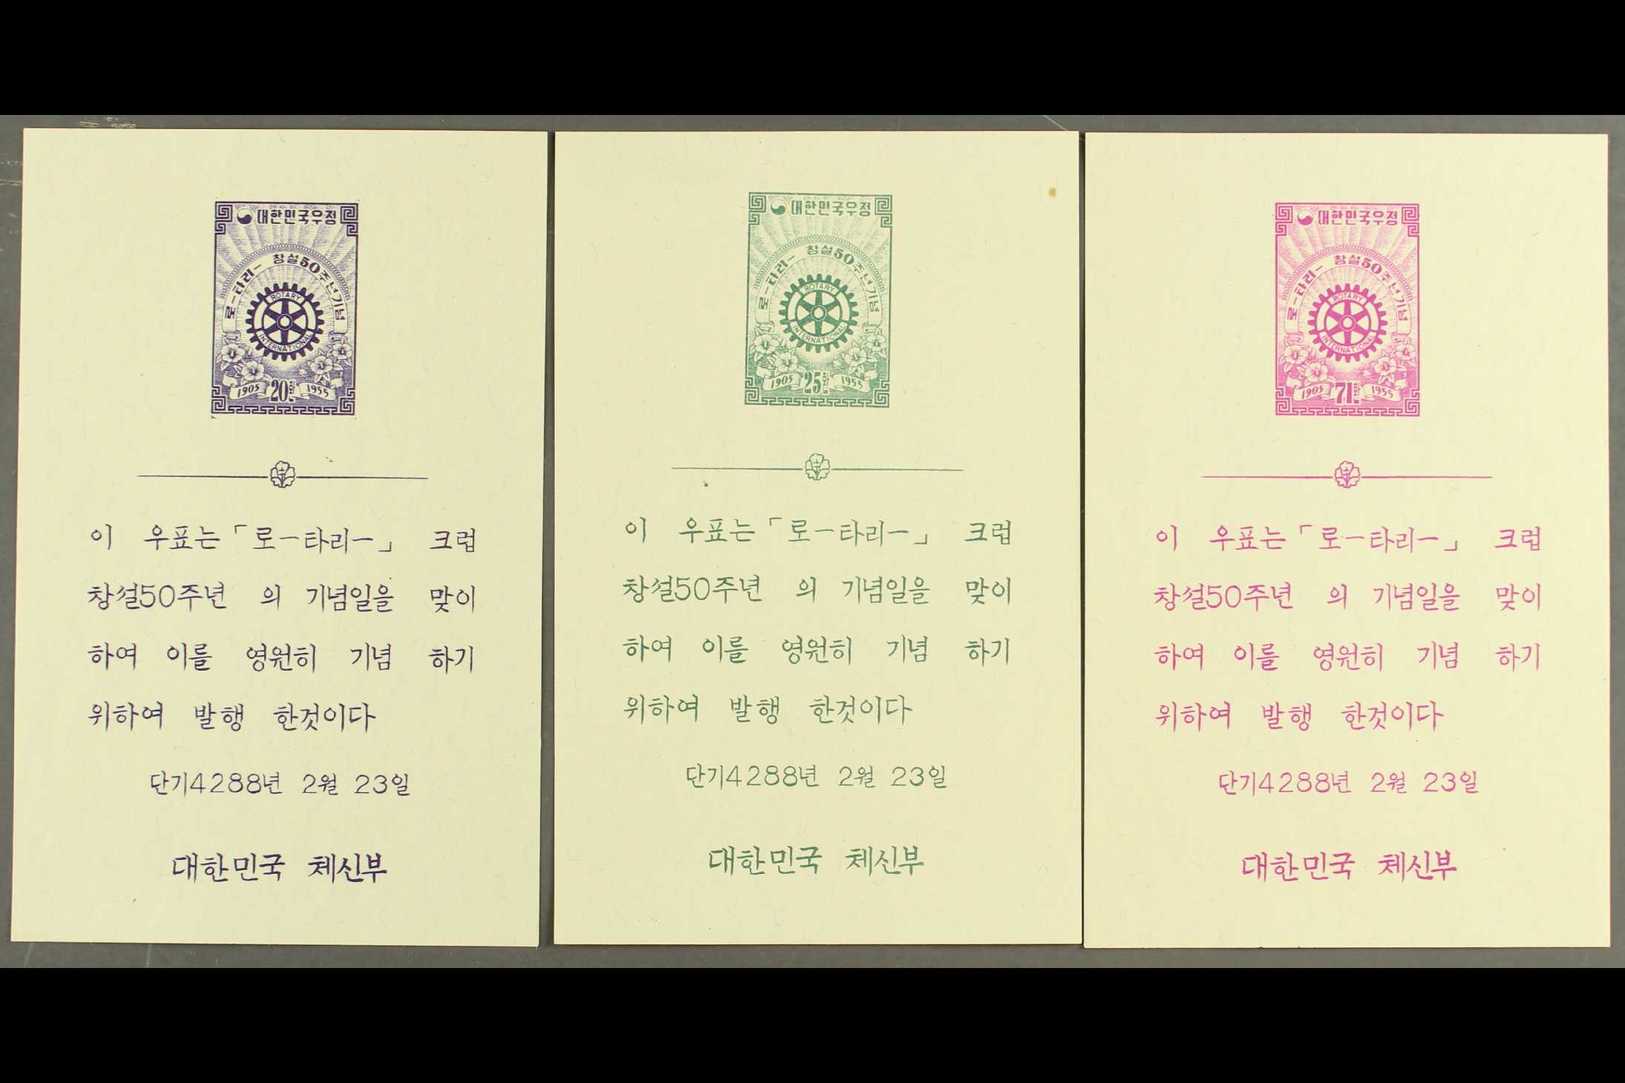 1955 ROTARY MINIATURE SHEETS  50th Anniversary Of Rotary International Complete Set Of Three Imperf Miniature Sheets, Wi - Corea Del Sur